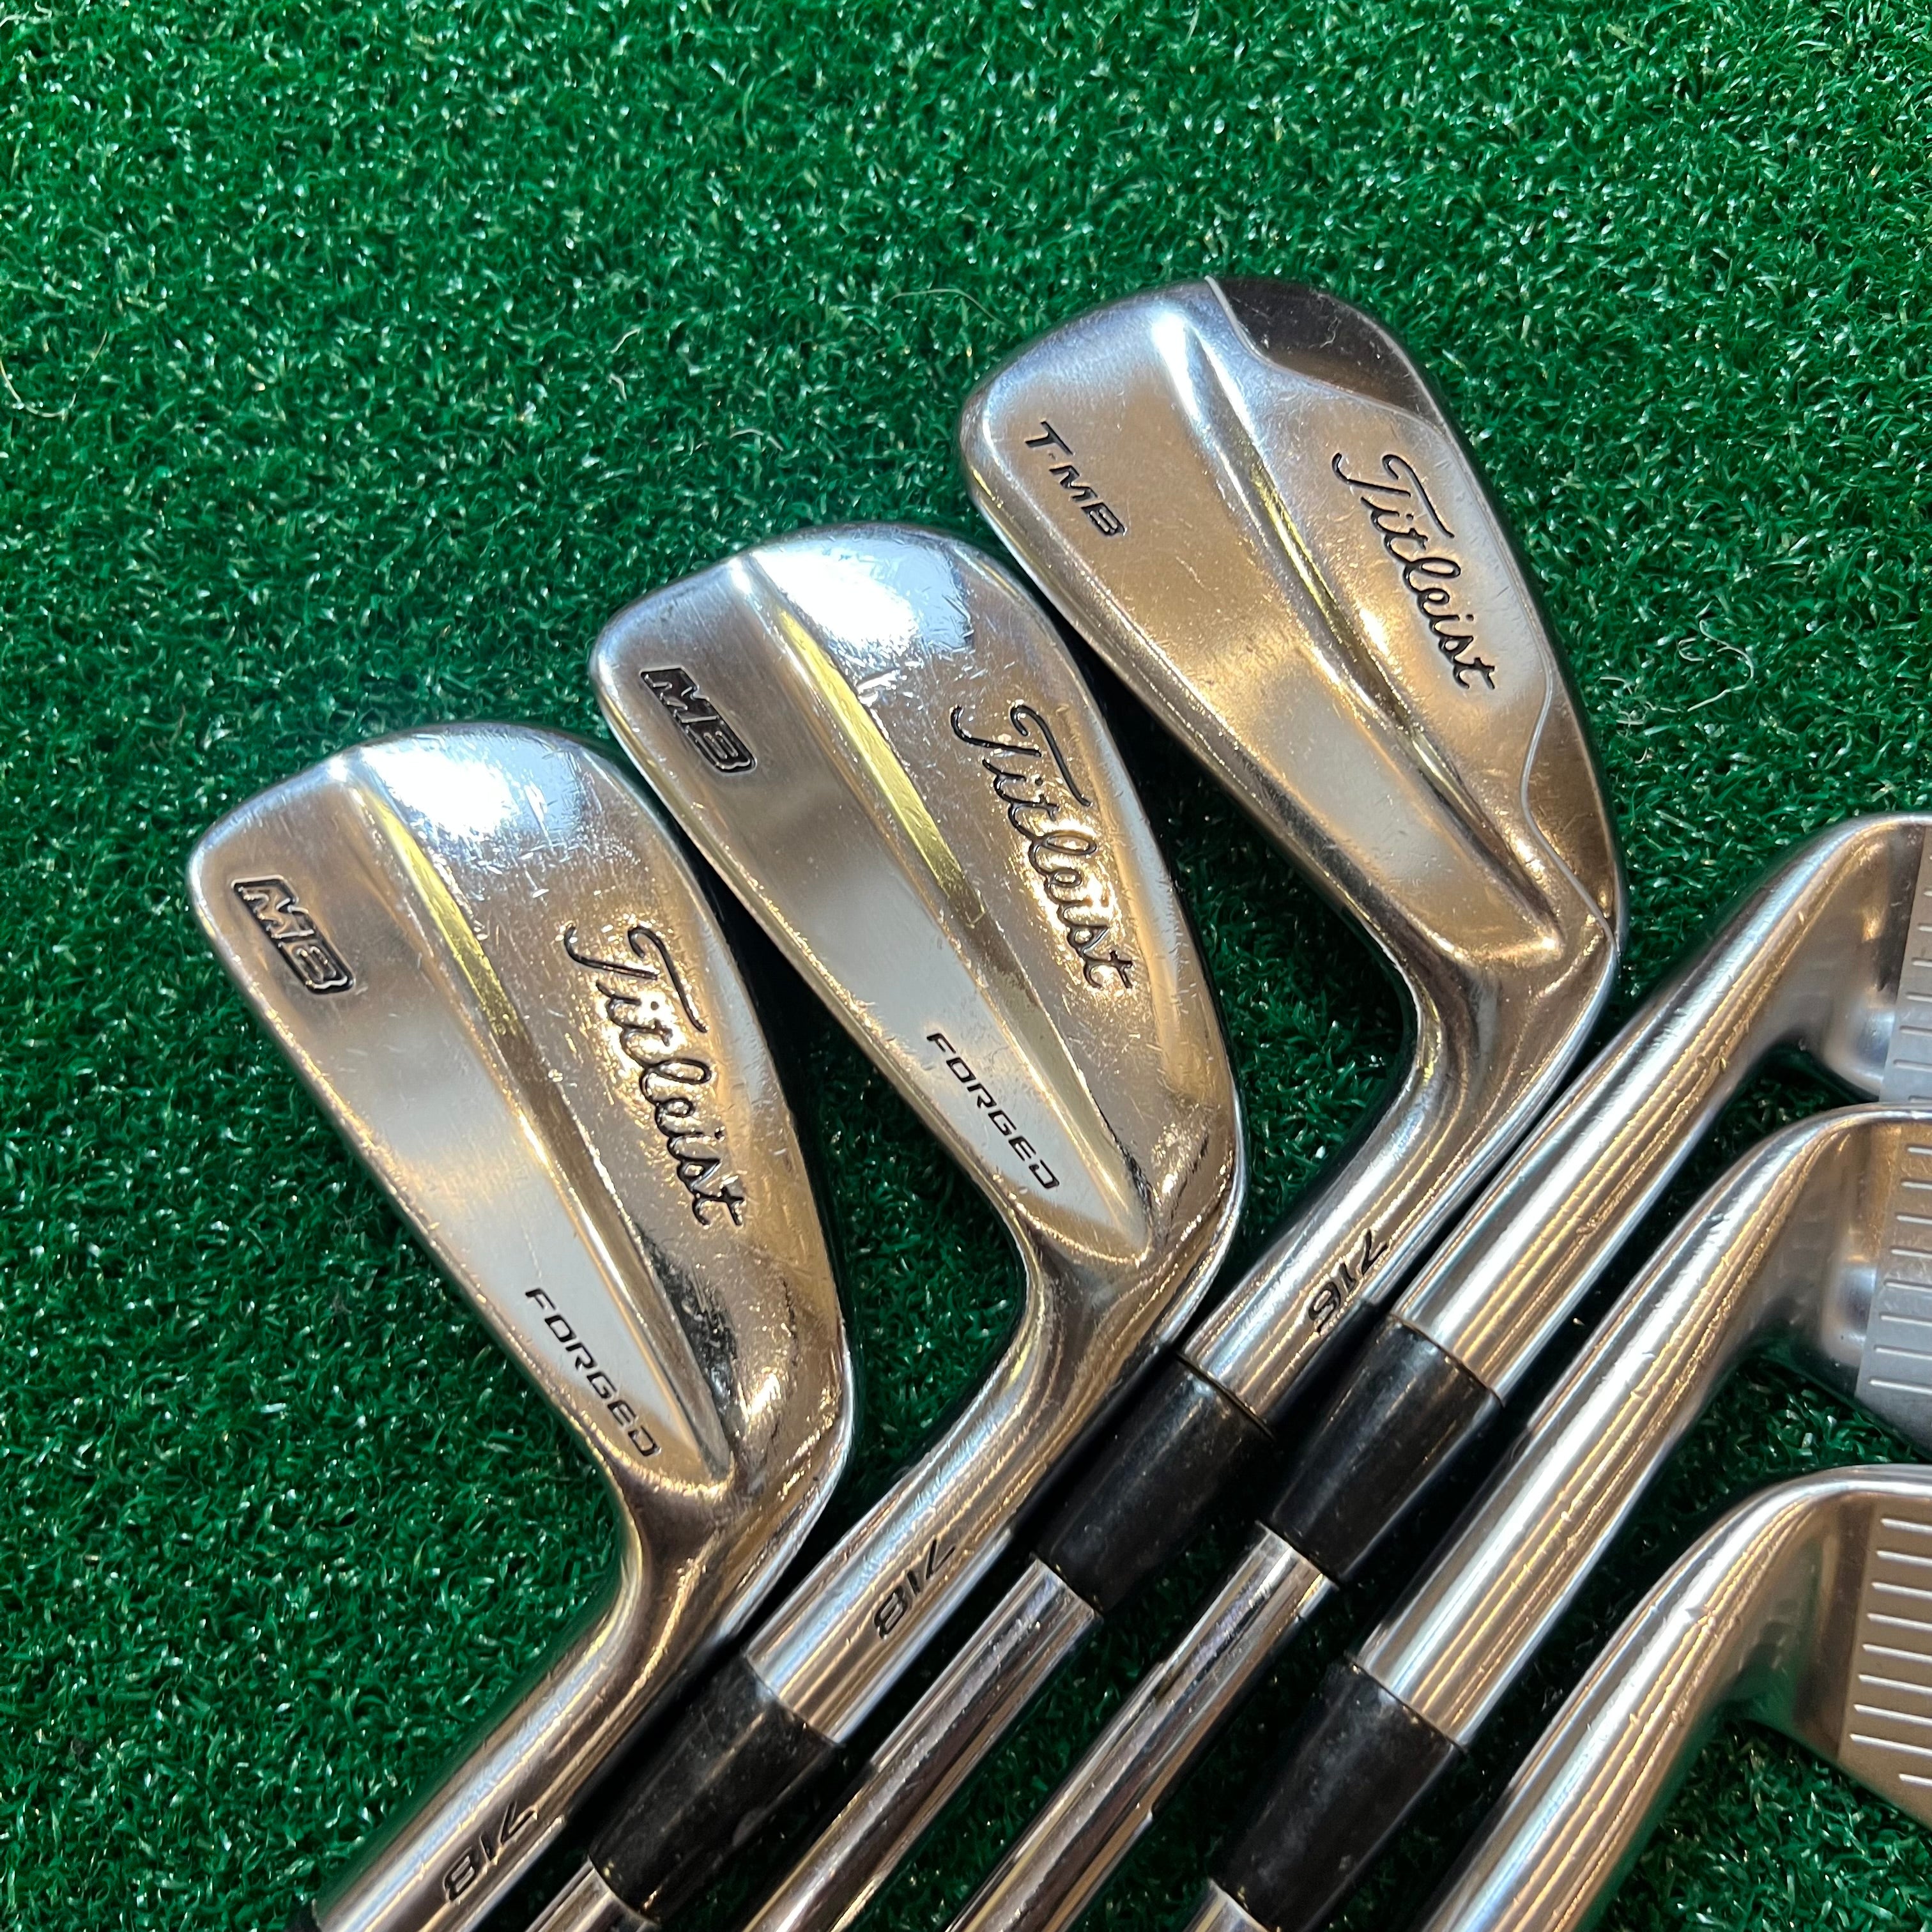 TITLEIST 718 TMB/MB COMBO SET / 5-PW / DYNAMIC GOLD TOUR ISSUE X100 SHAFTS